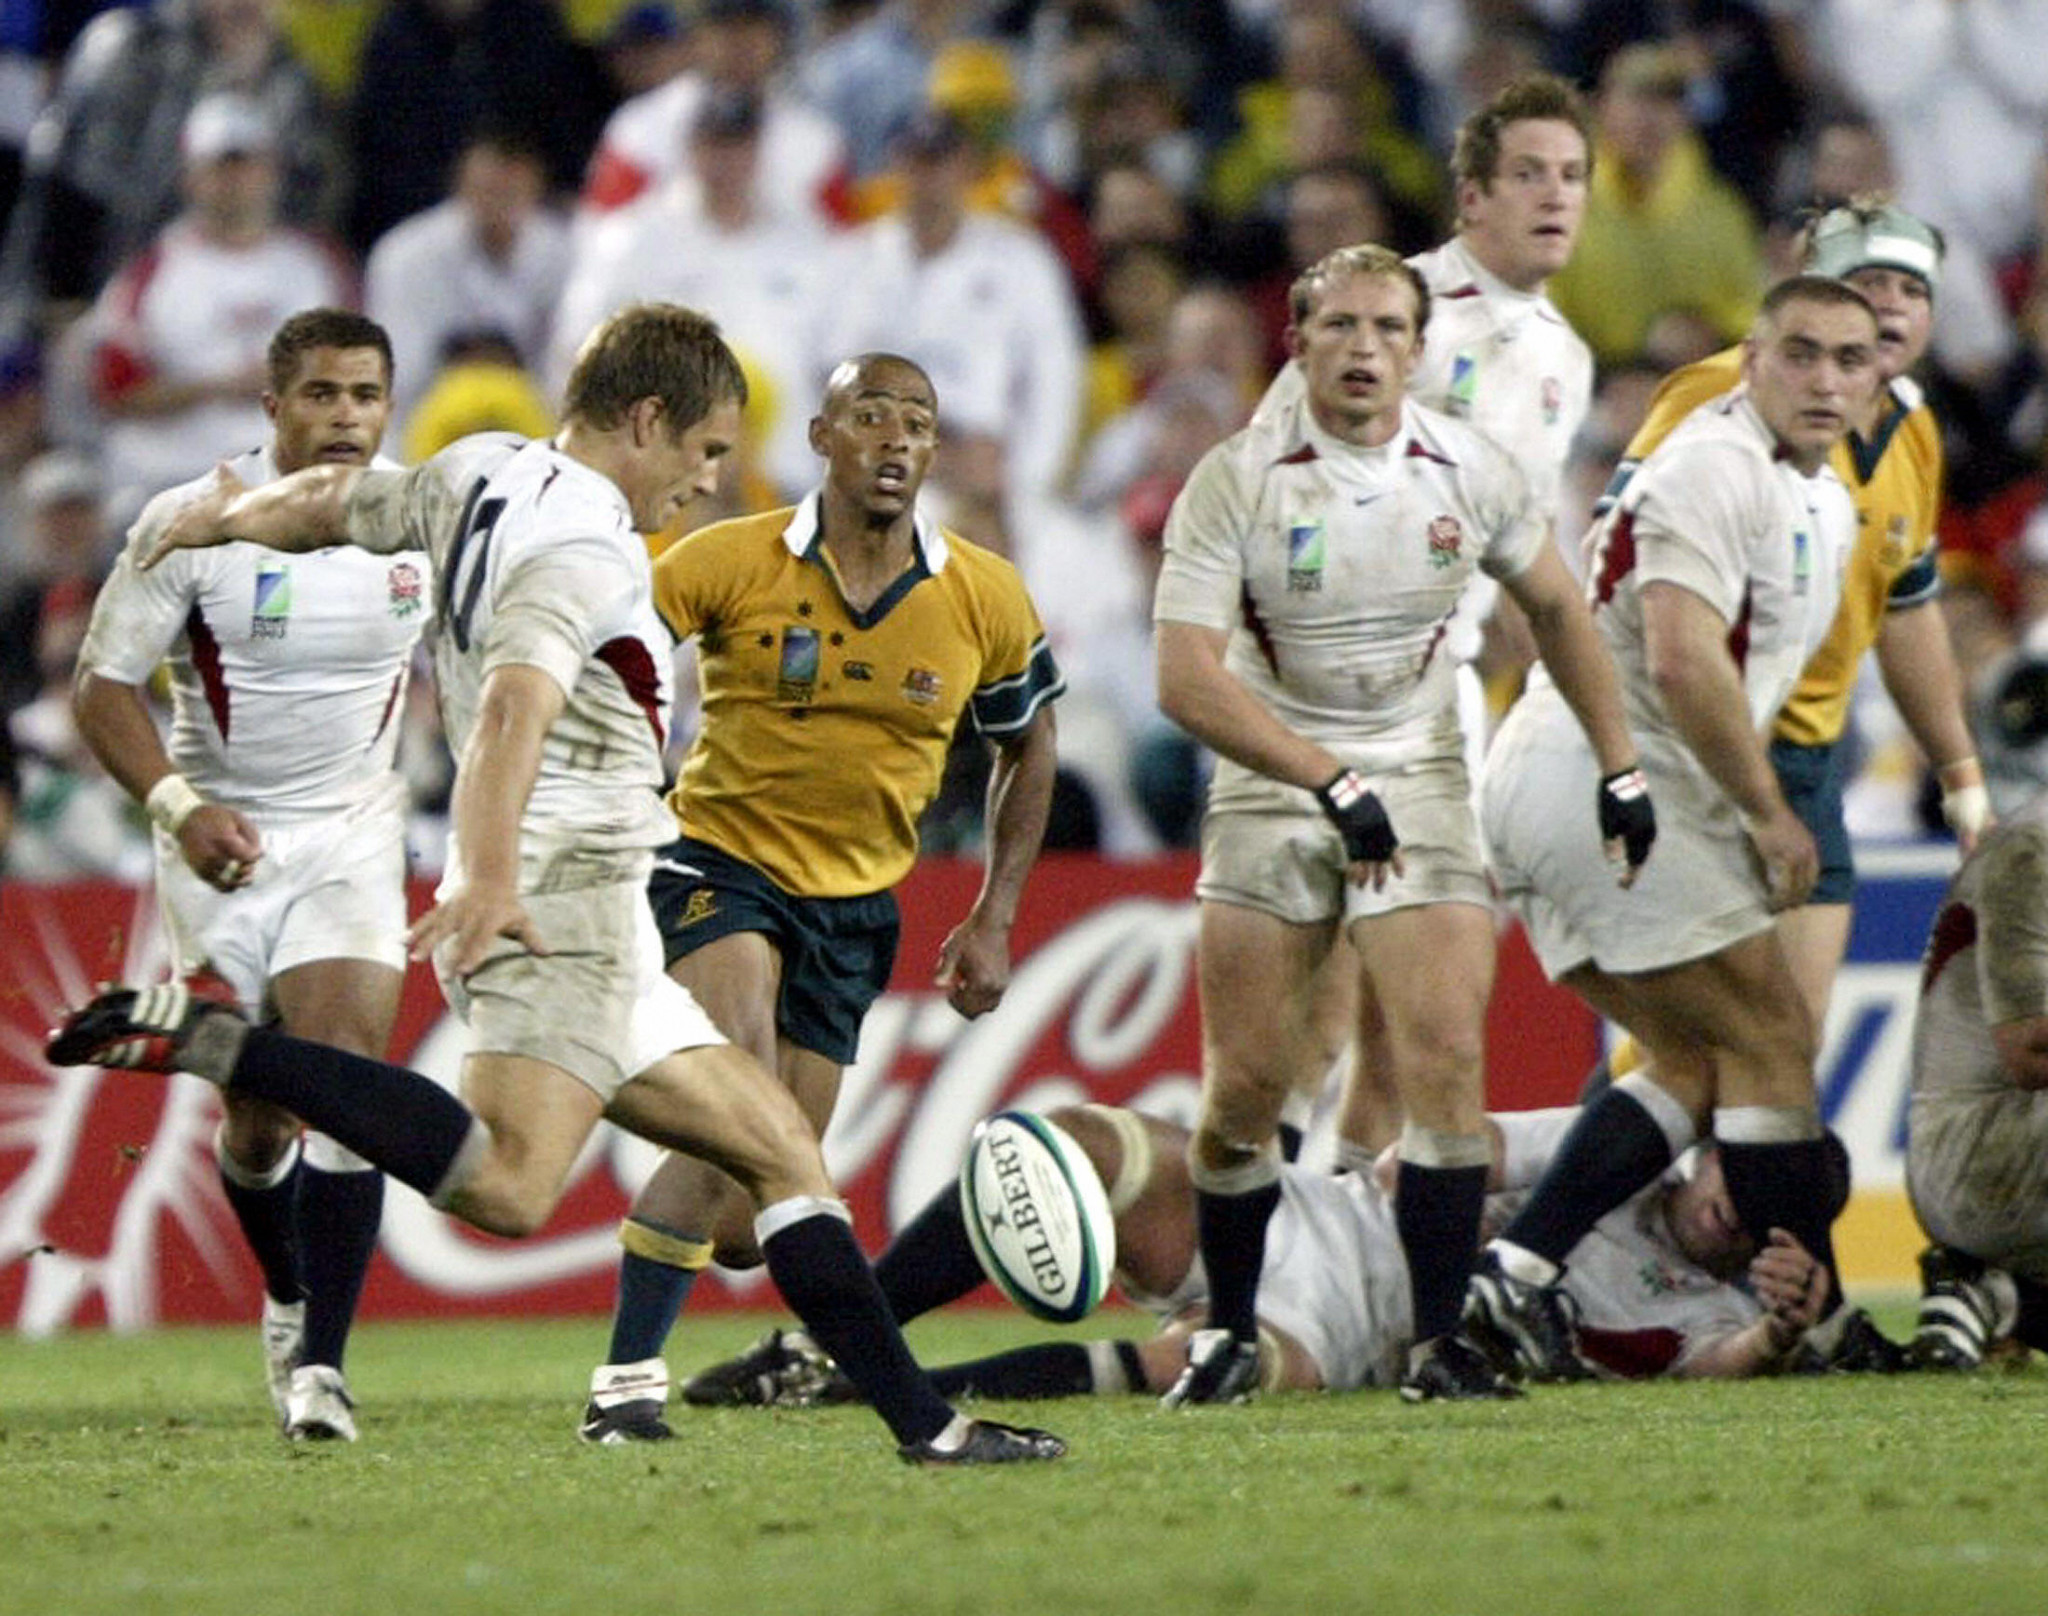 The match's viewing figures beat other major sporting events in Australia including the 2003 Rugby World Cup final which took place in Sydney ©Getty Images